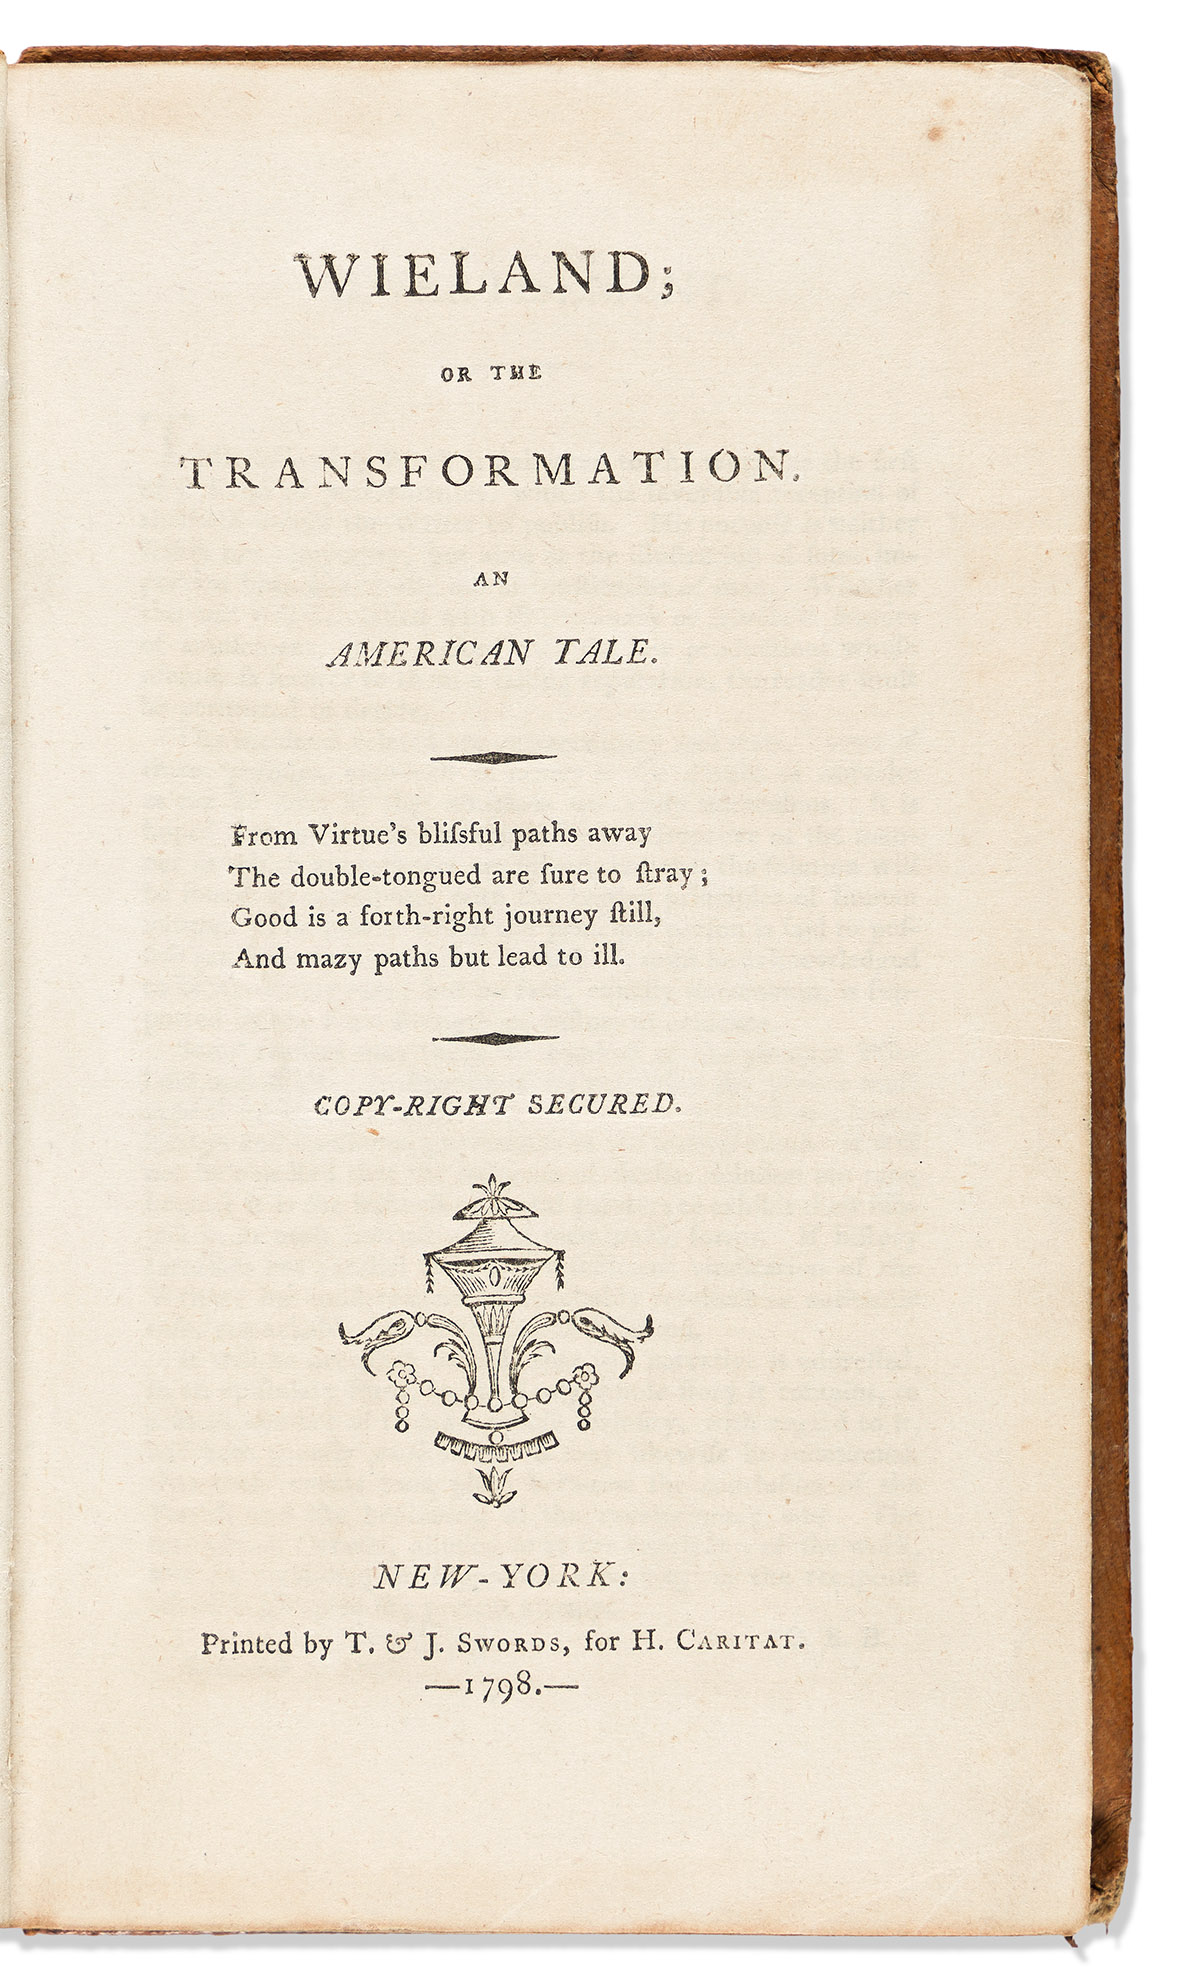 Brown, Charles Brockden (1771-1810) Wieland; or the Transformation, An American Tale.